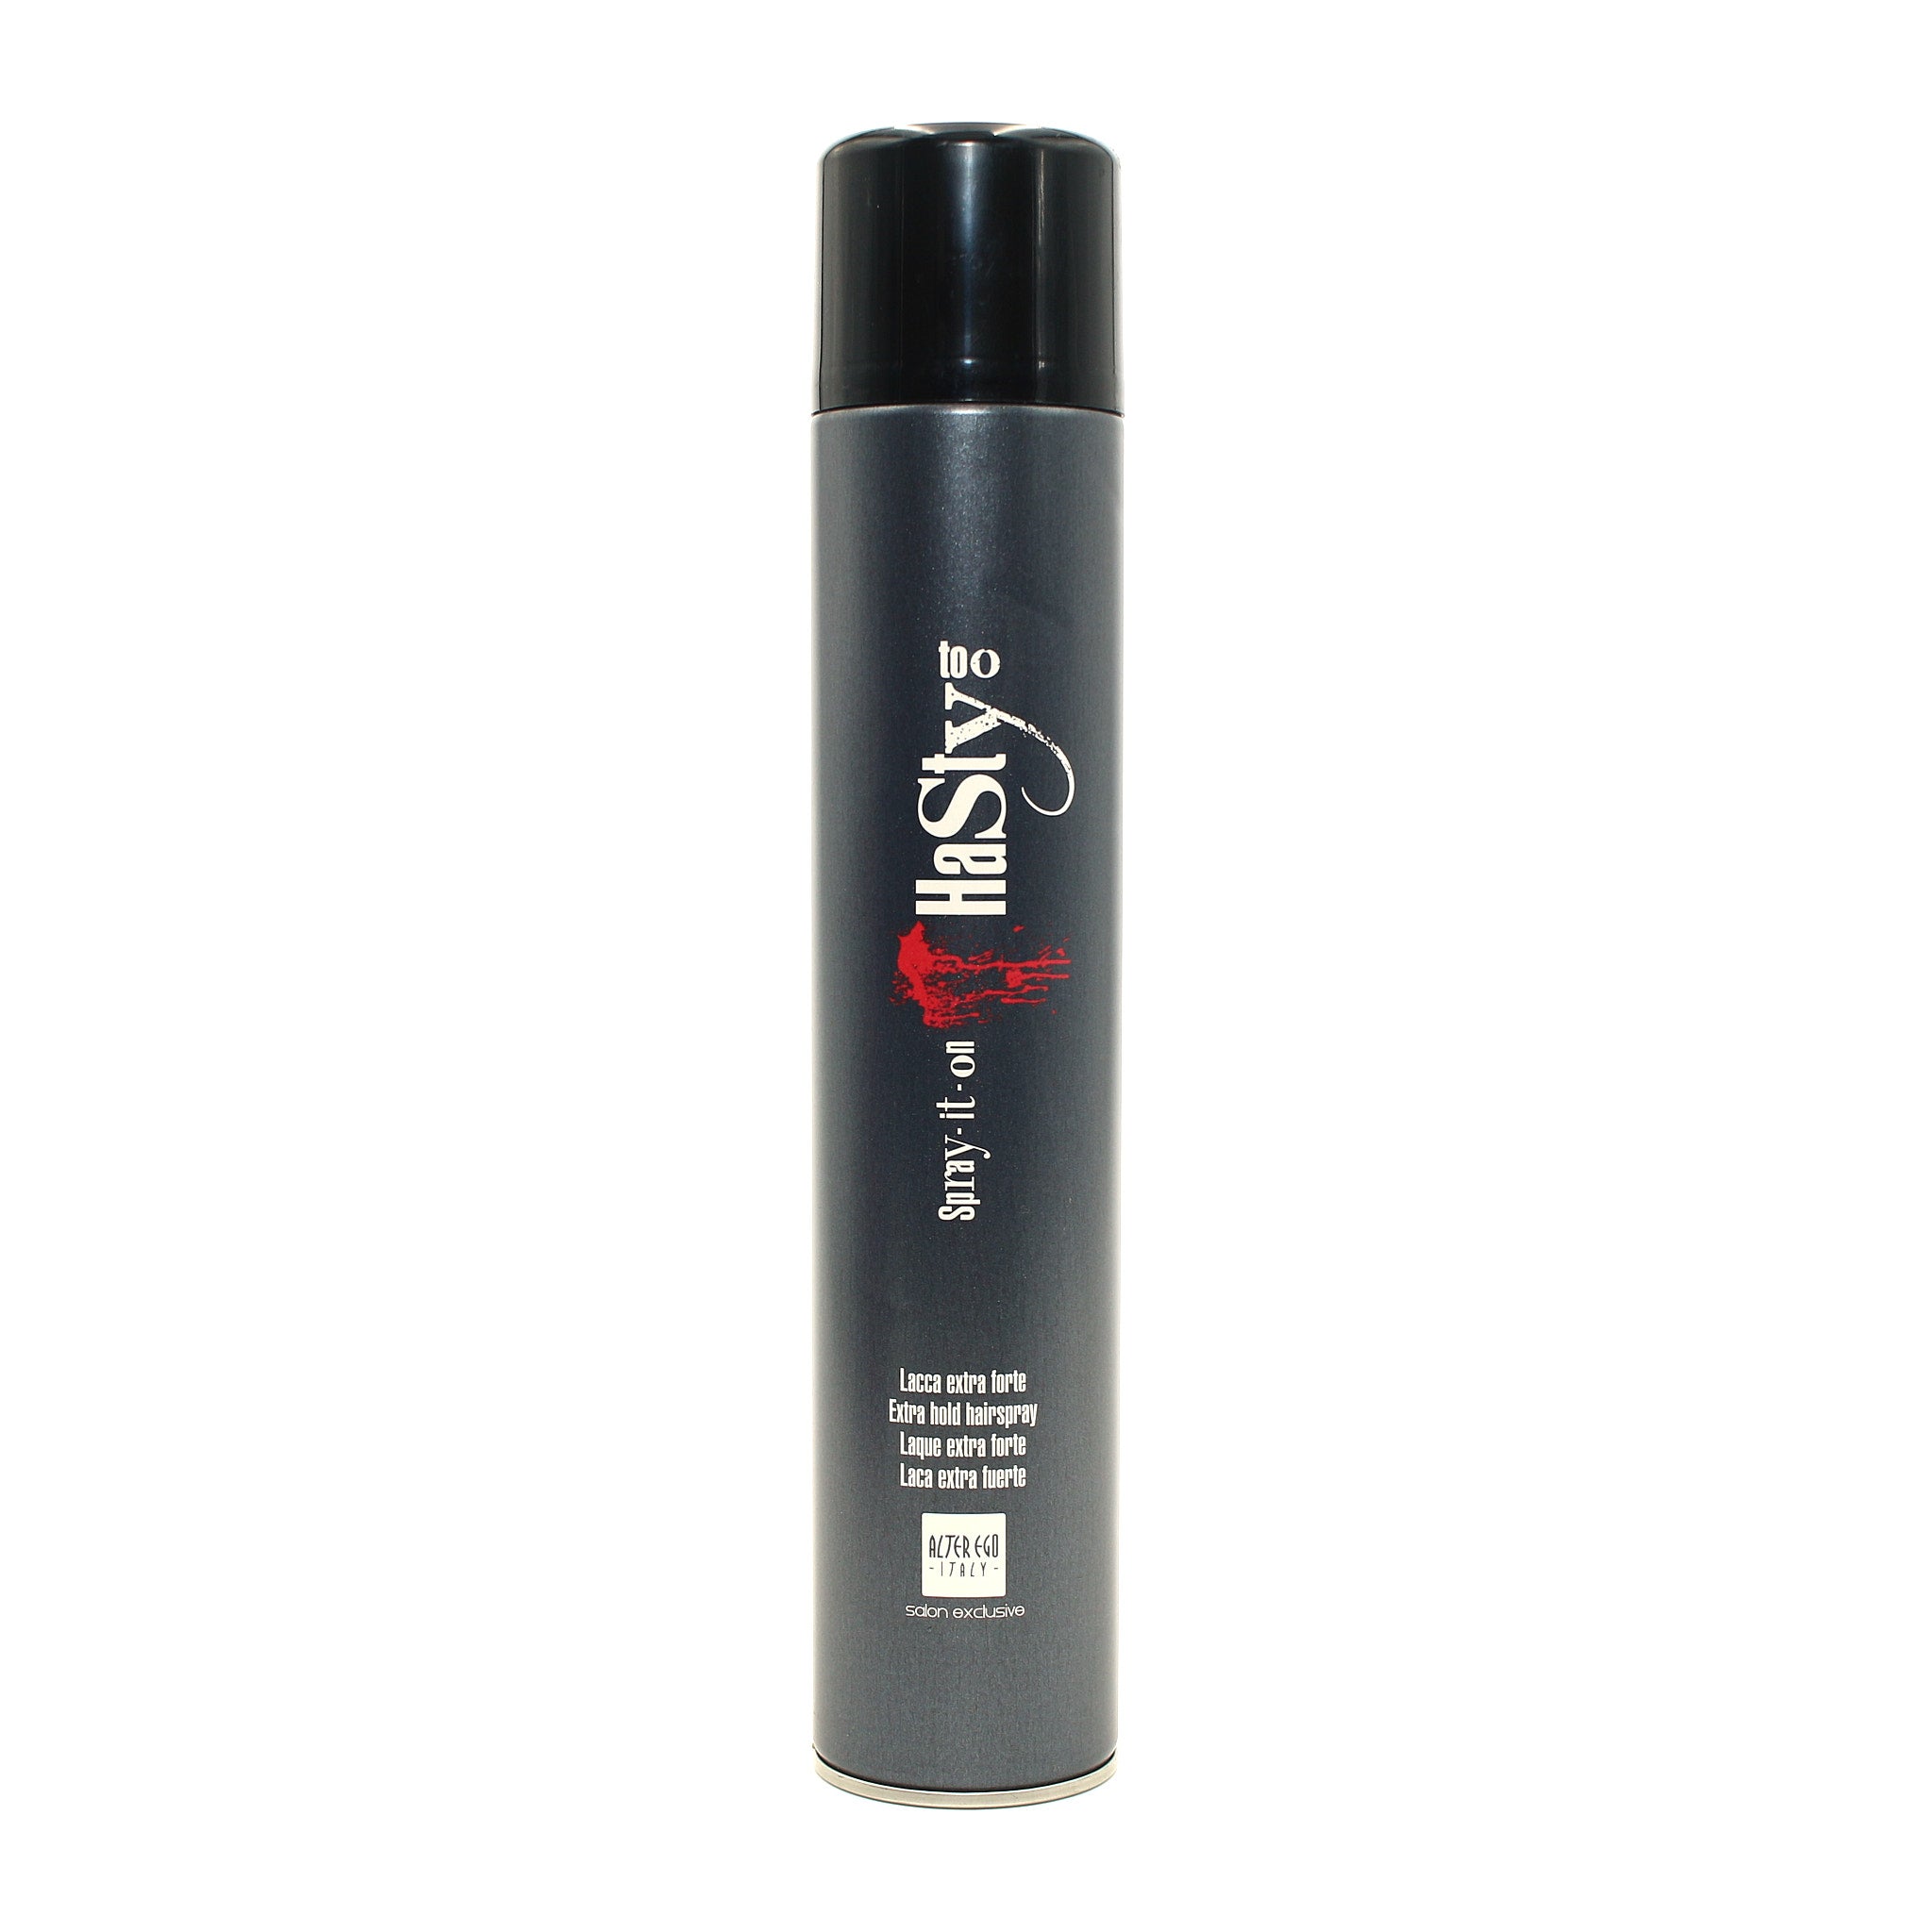 ALTER EGO Hasty Too HI-T Security Heat Protection Spray 10 oz